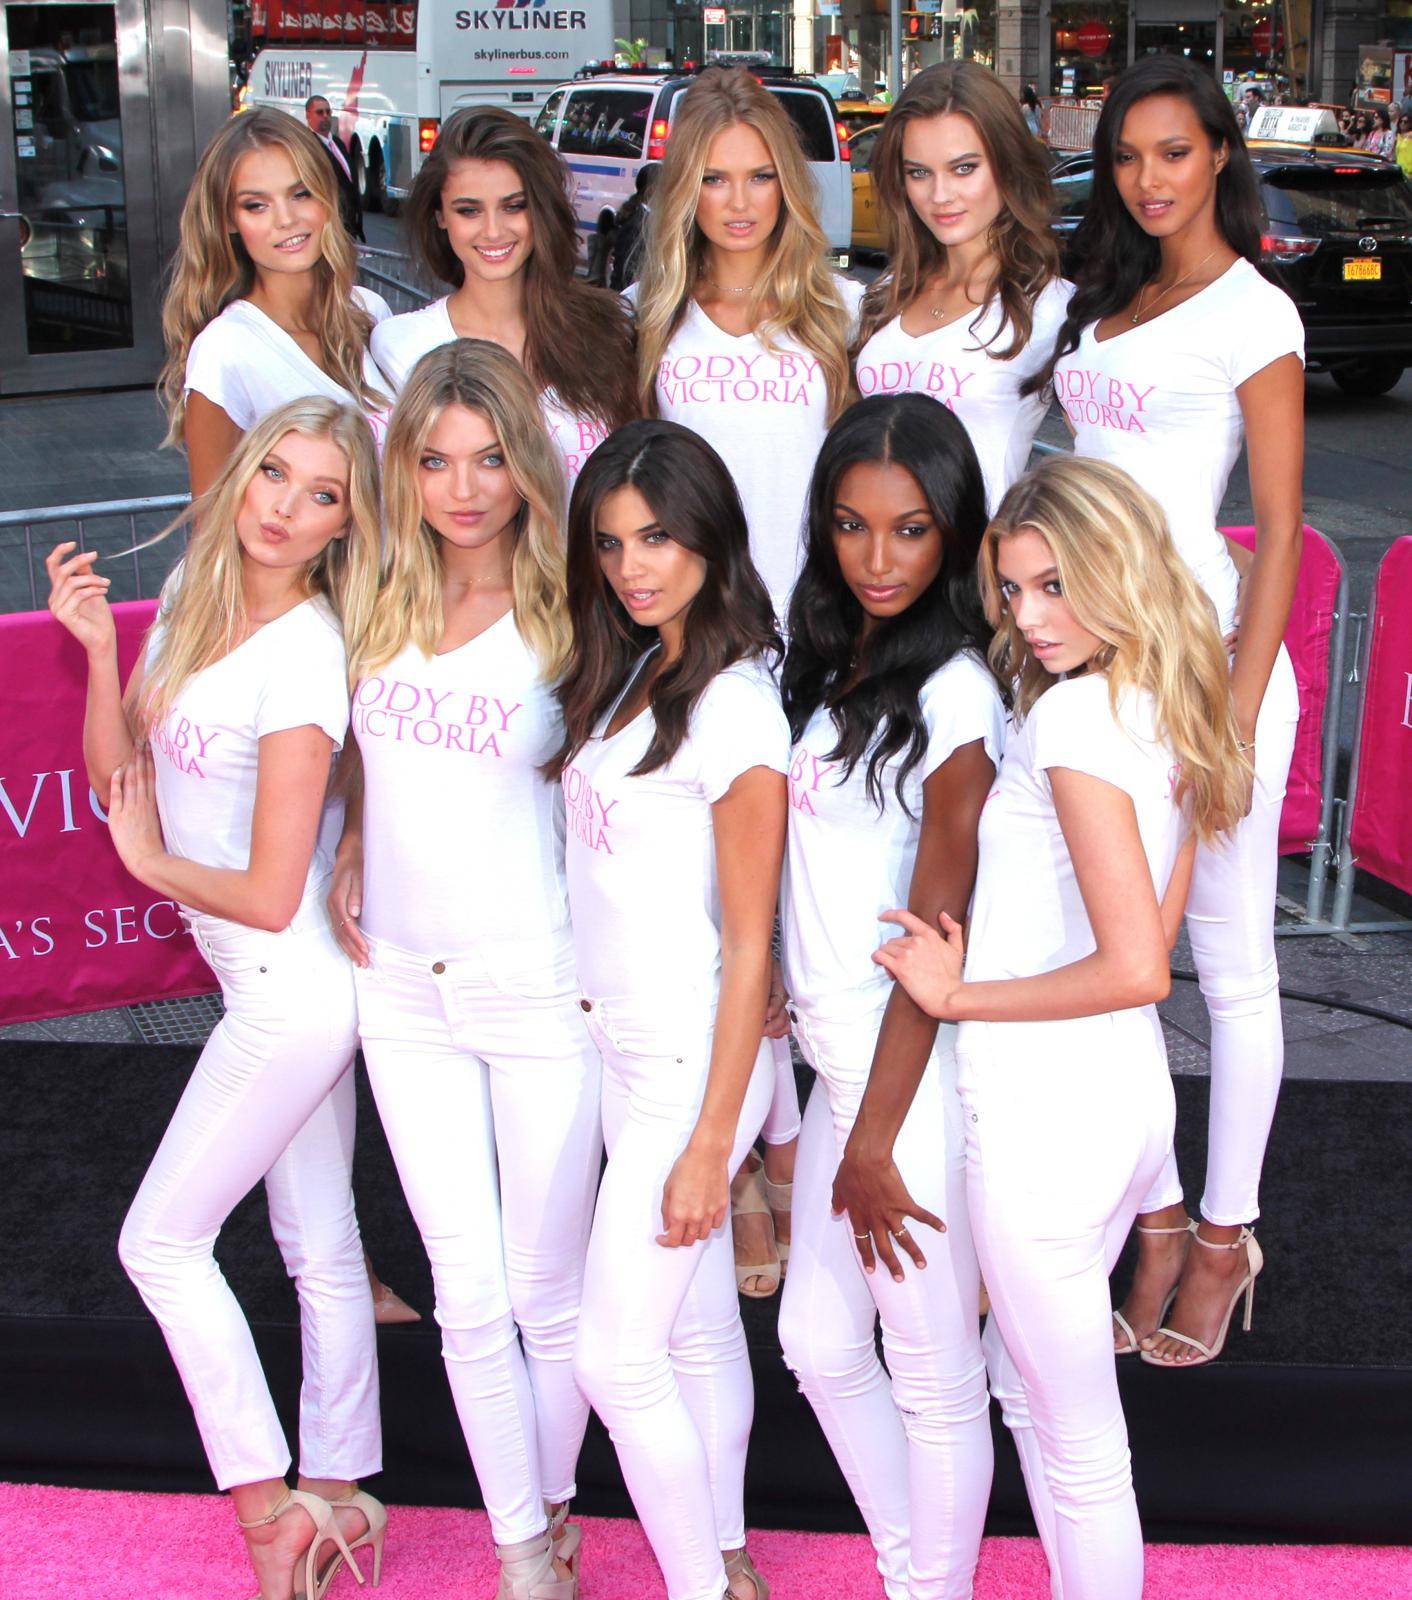 The Newest Victorias's Secret Angels Launch The All New Body by Victoria Campaign